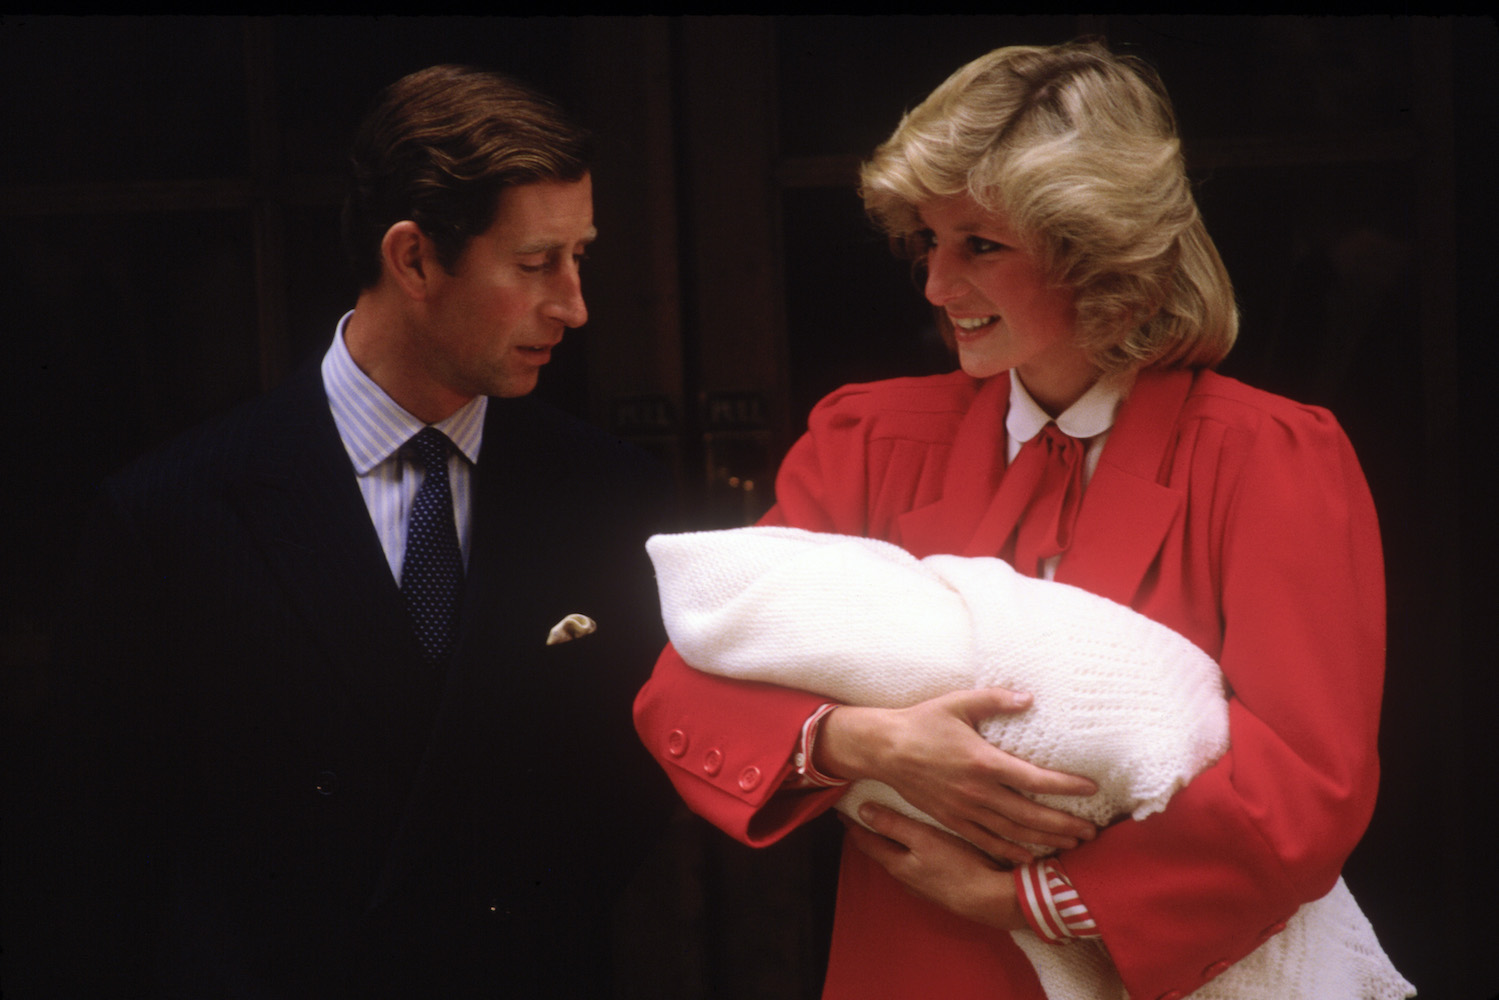 LONDON - SEPTEMBER 16:  Diana Princess of Wales and Prince Charles with new born Prince Harry, leave St.Mary's Hospital on September 16, 1984 in Paddington, London. Diana wore an oufit designed by Jan Van Velden. (Photo by David Levenson/Getty Images)